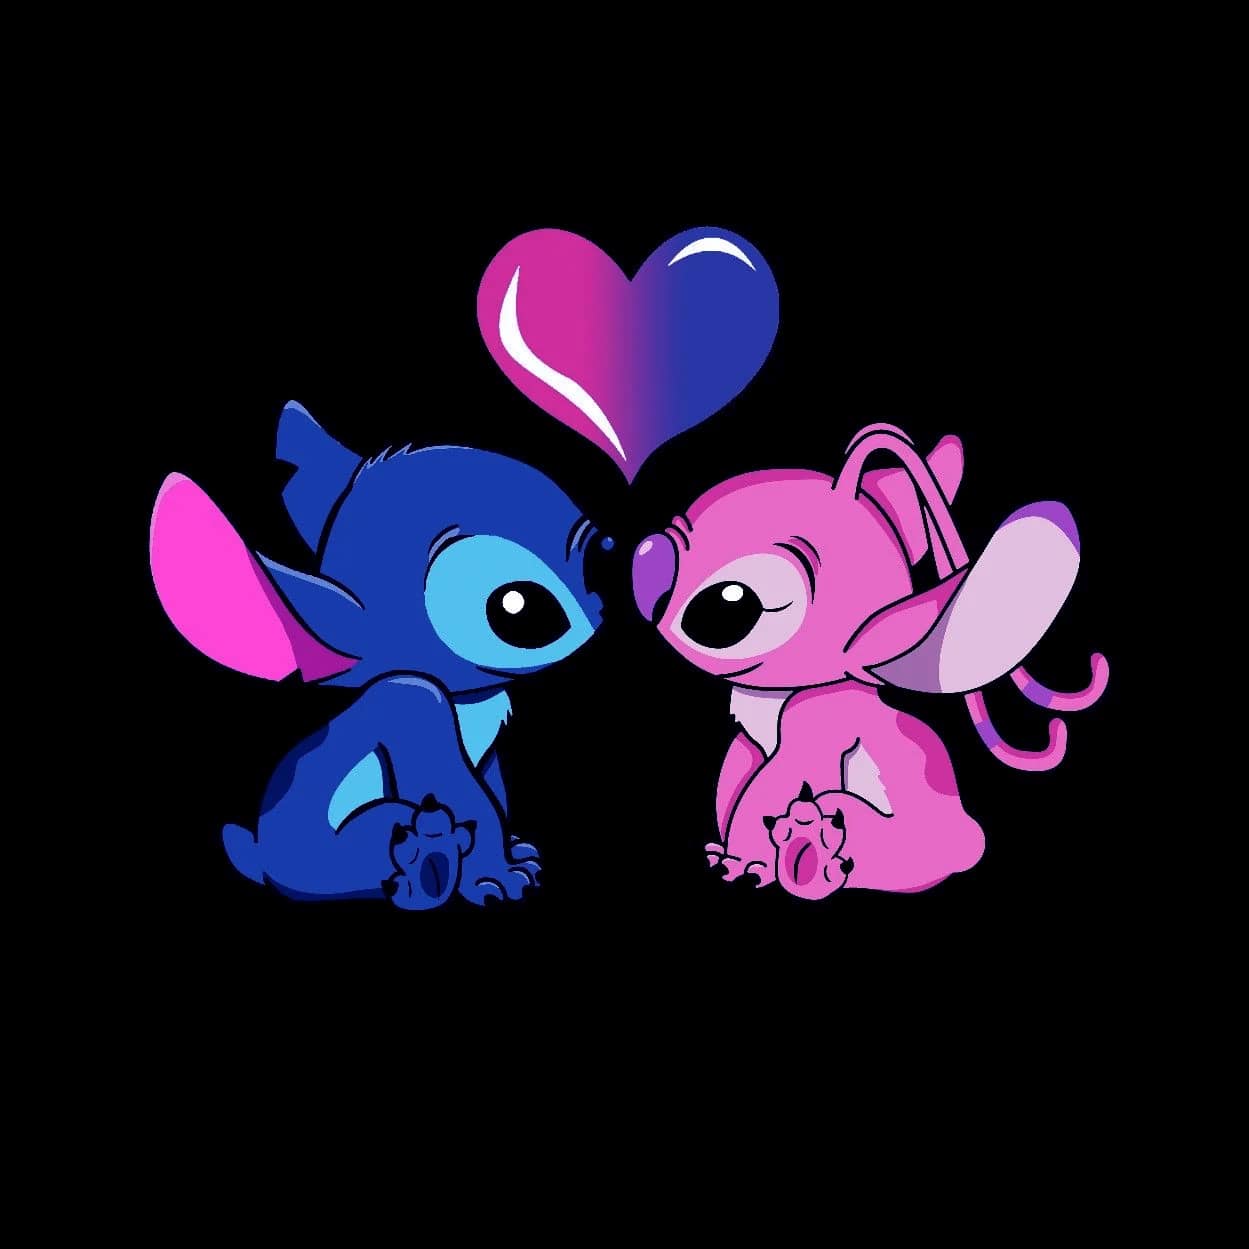 Stitch And Angel Wallpapers  Top 20 Best Stitch And Angel Wallpapers  HQ 